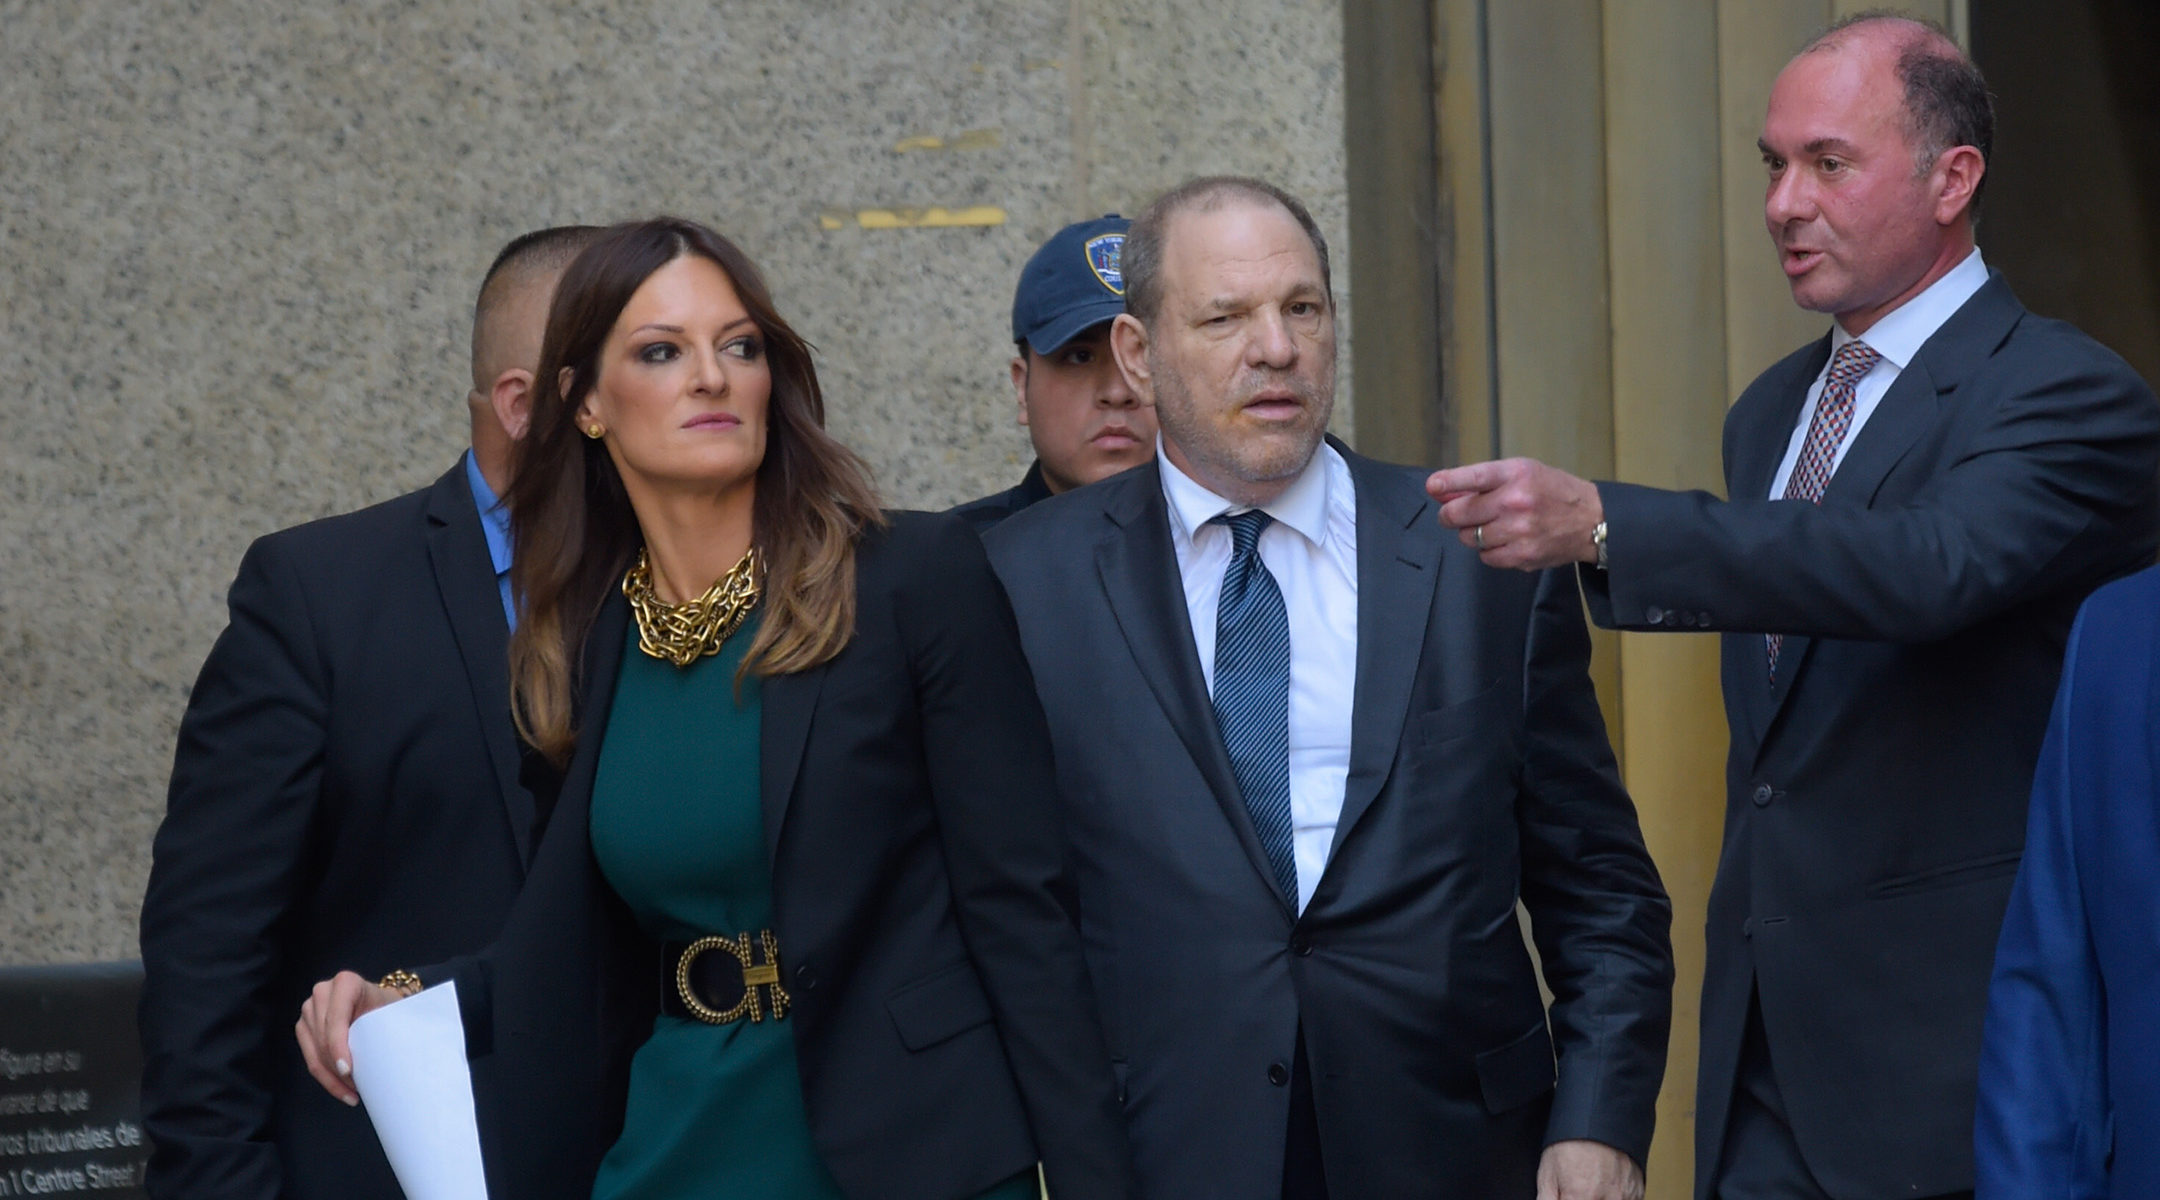 Harvey Weinstein and Donna Rotunno come out of a New York City court on July 11, 2019 (Raymond Hall/GC Images)